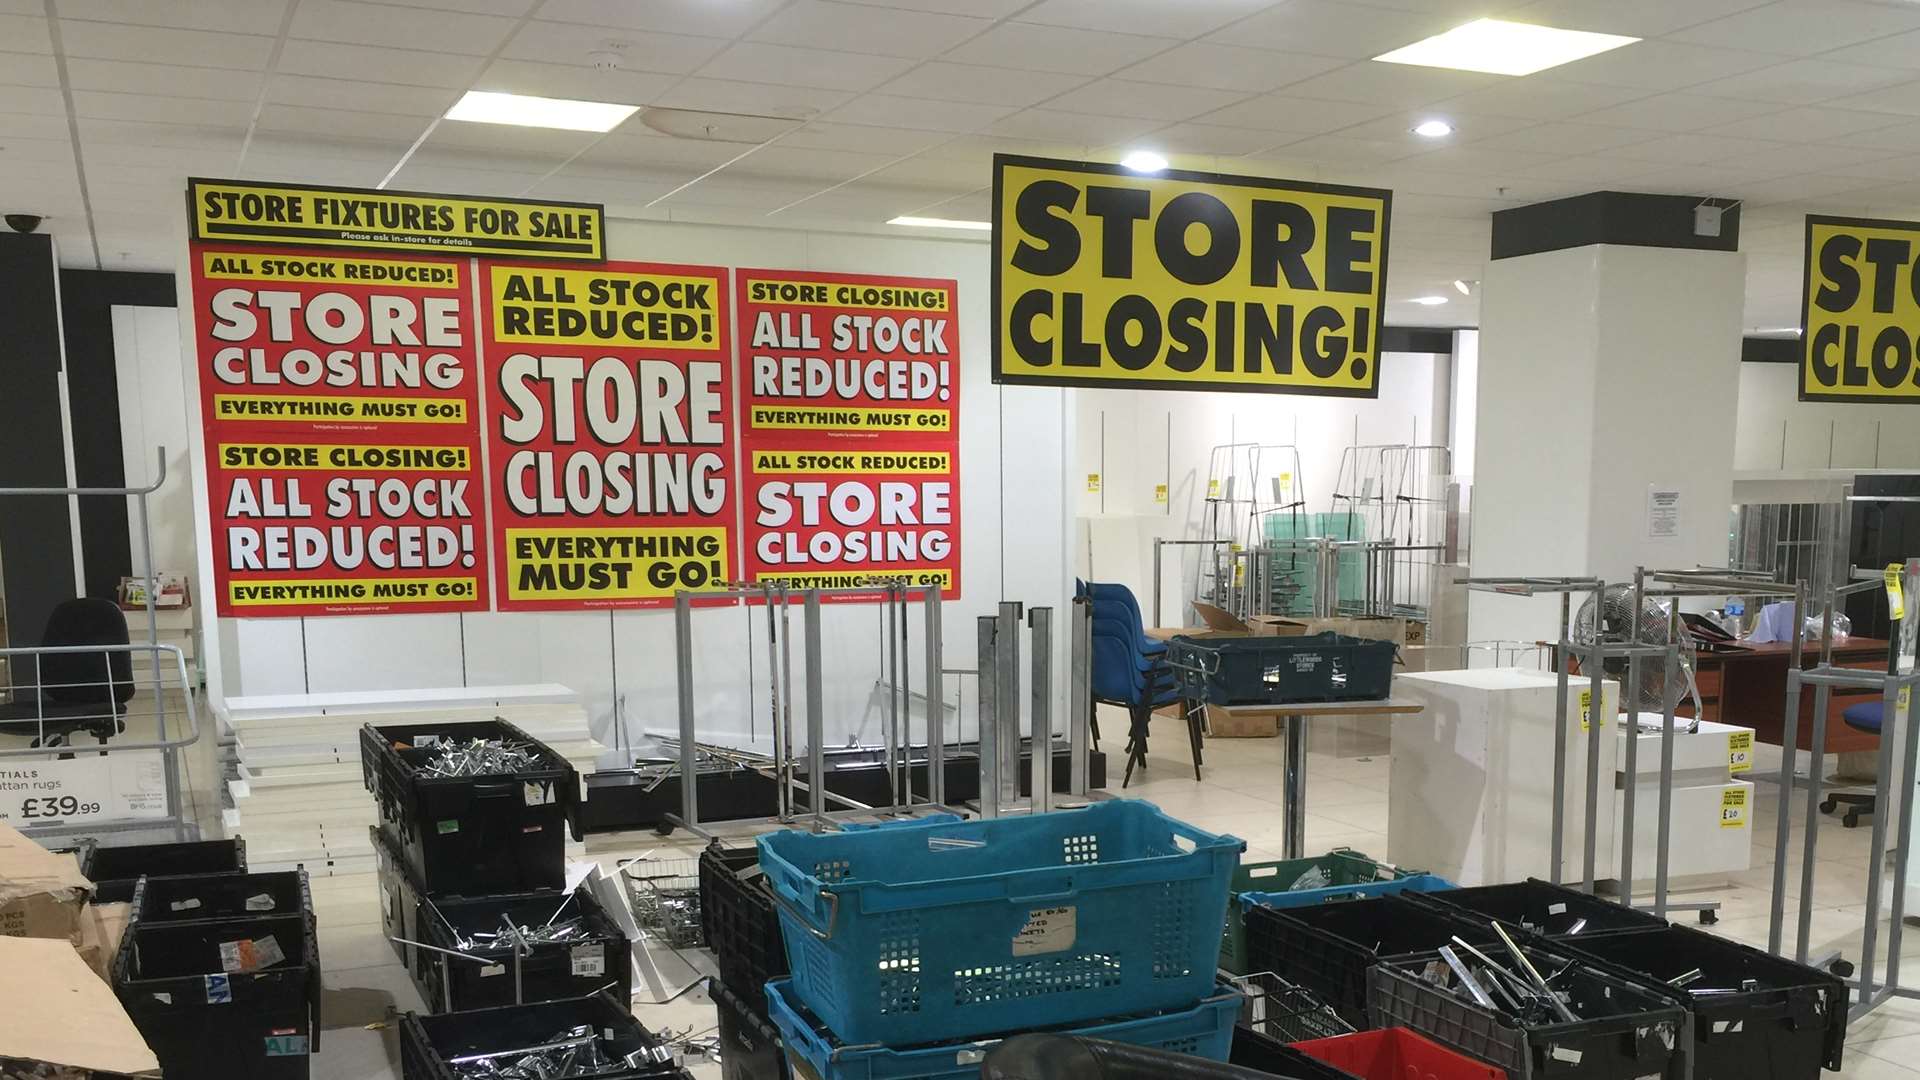 All the fixtures and fittings of Ashford's BHS store are also being sold